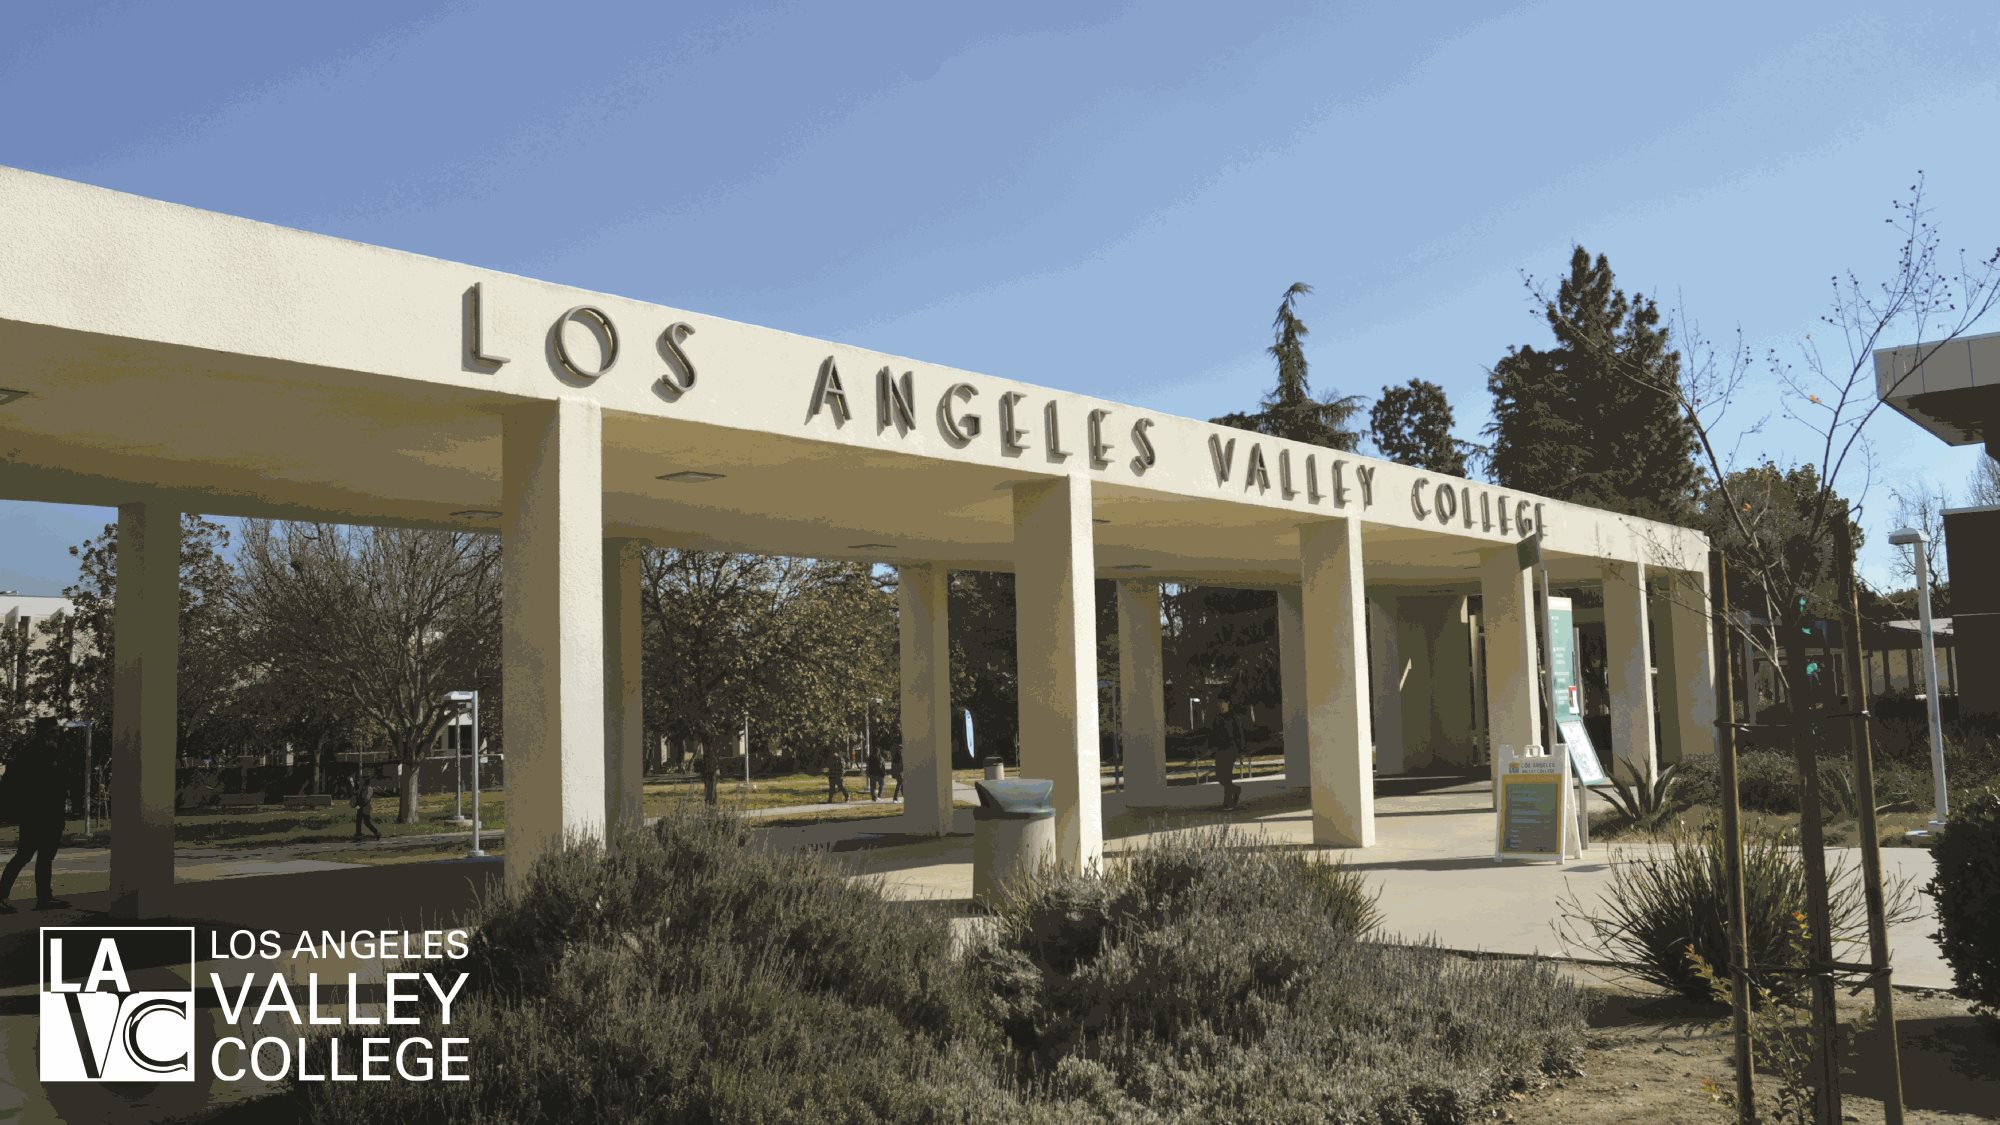 Los Angeles Valley College Entrance Zoom Background